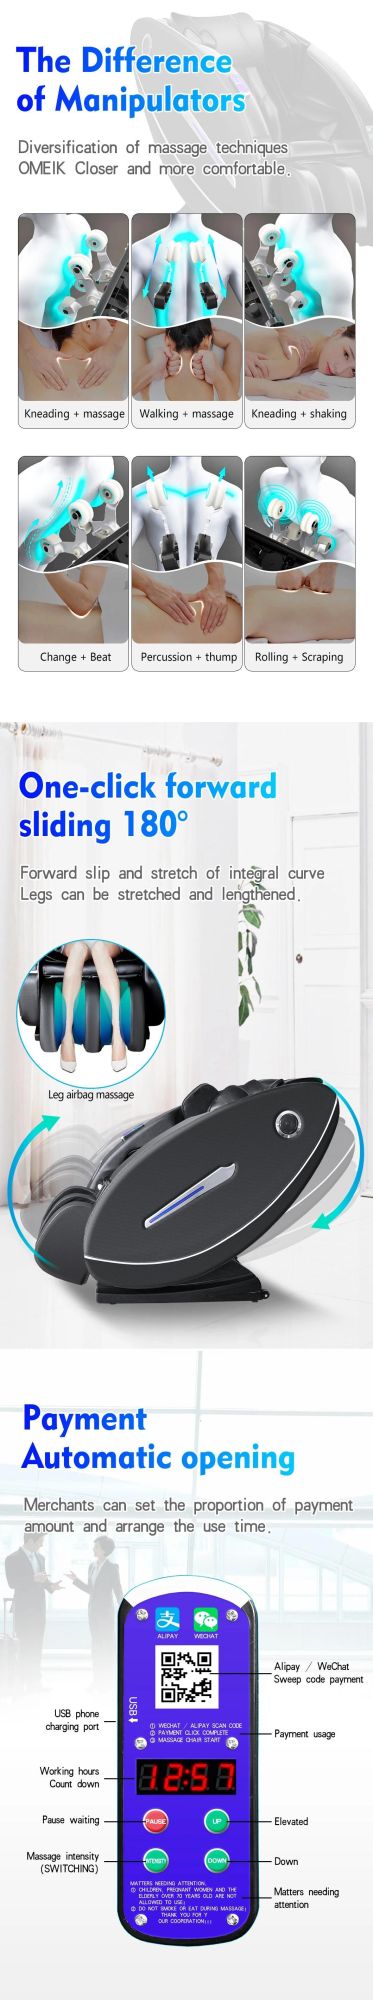 New Design Best Comfortable Vending Coin and Paper Currency Massage Chair with Zero Gravity